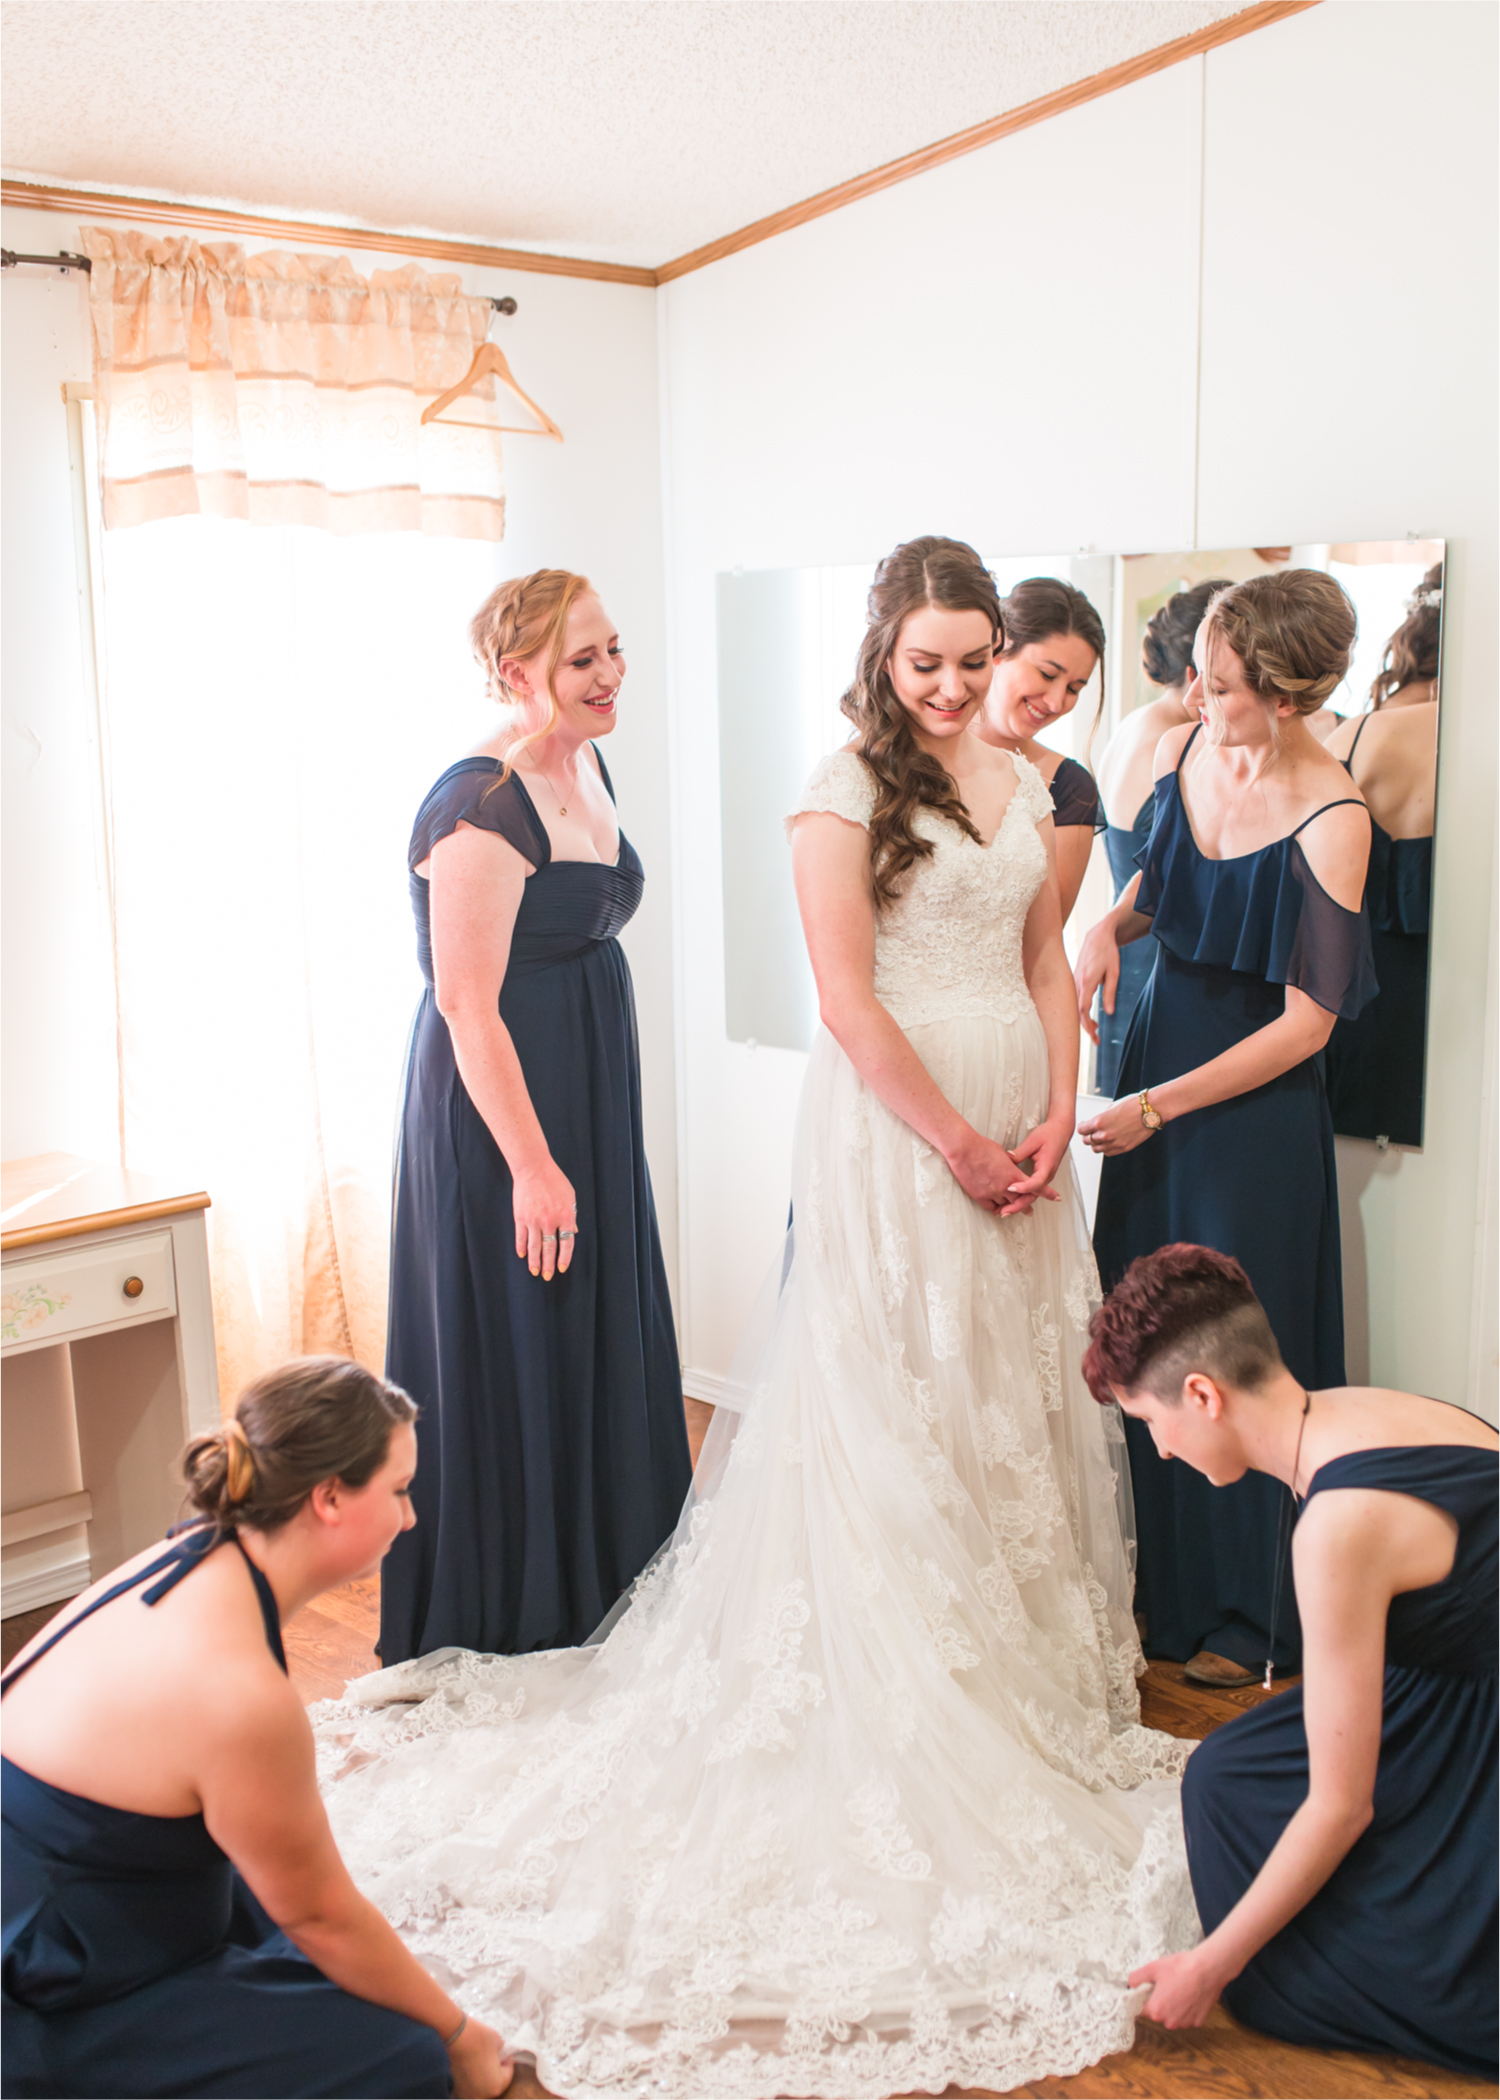 Summer Ellis Ranch Wedding in Loveland Colorado | Britni Girard Photography | Wedding Photo and Video Team | Bride hair Dondi AtWow from Sola Salon in Loveland | Getting Ready Suite